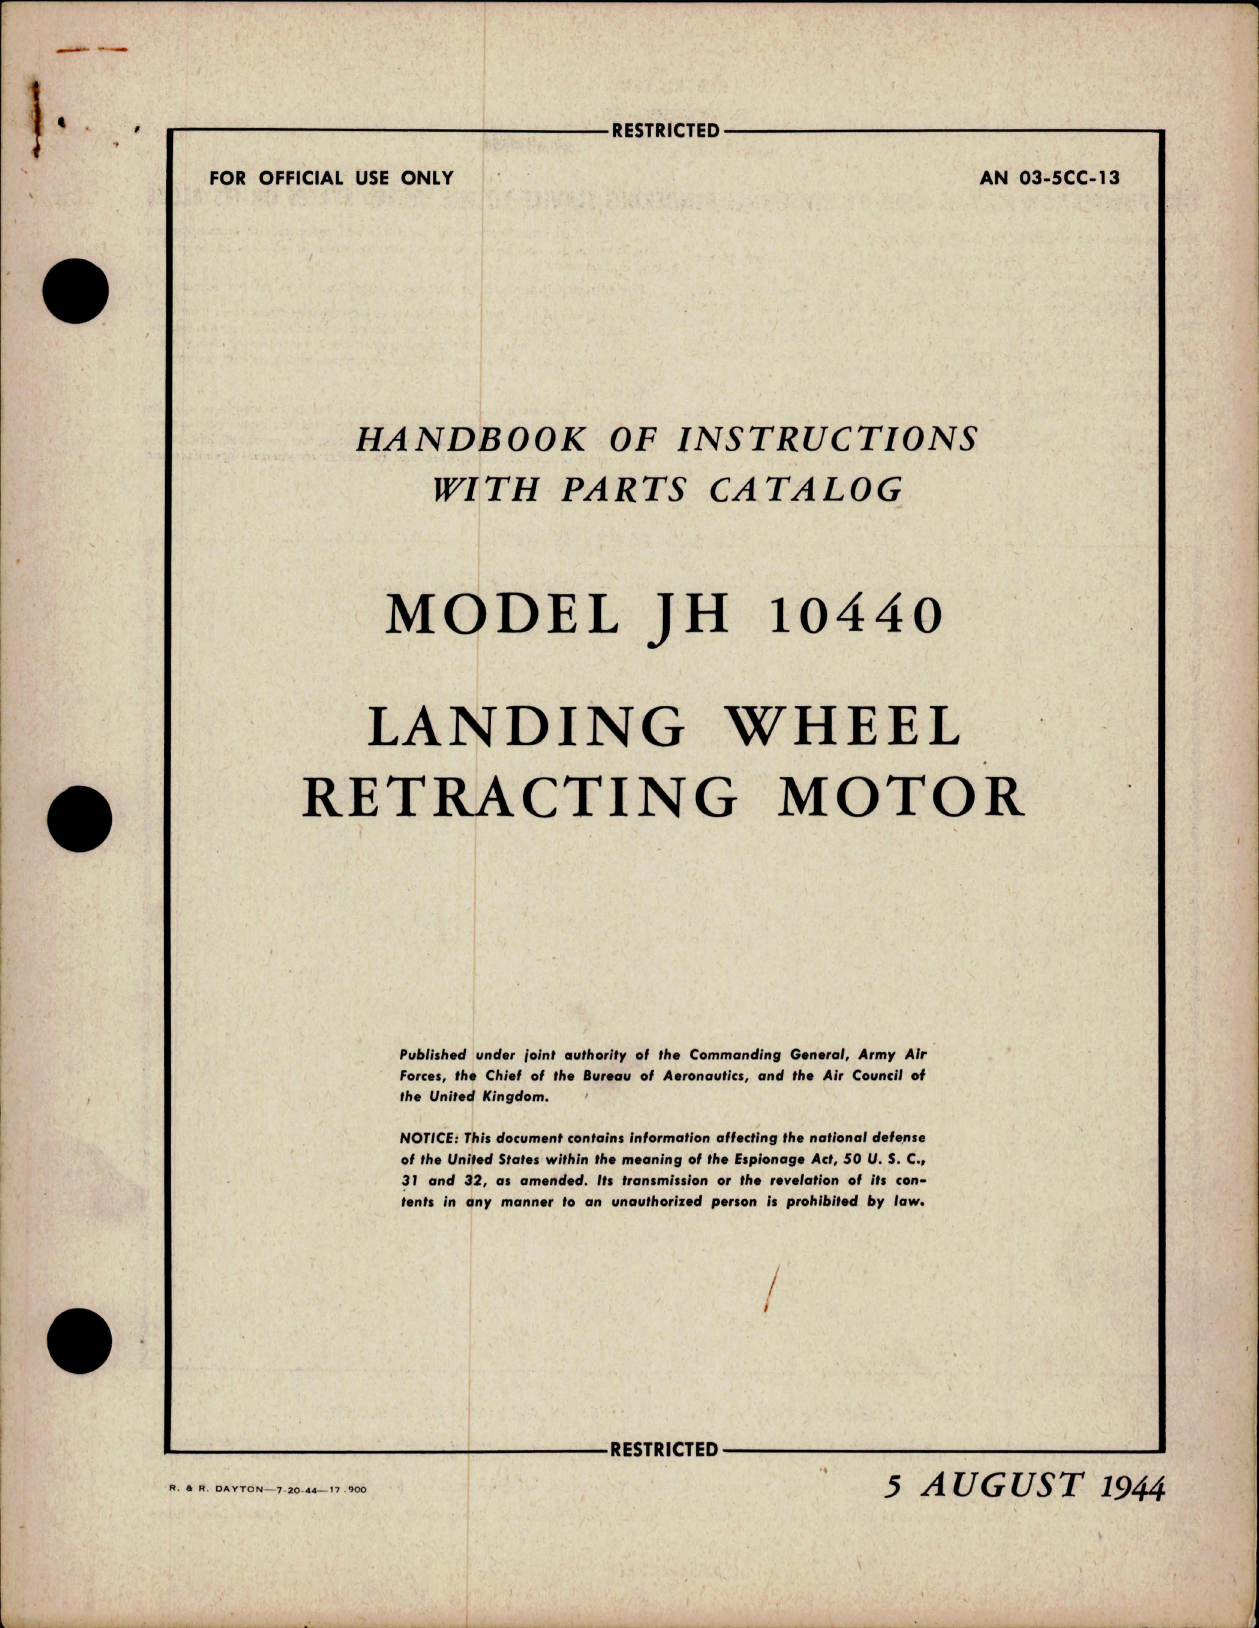 Sample page 7 from AirCorps Library document: Operation, Service, Overhaul Instructions with Parts Catalog for Landing Wheel Retracting Motor - Model JH I0440 